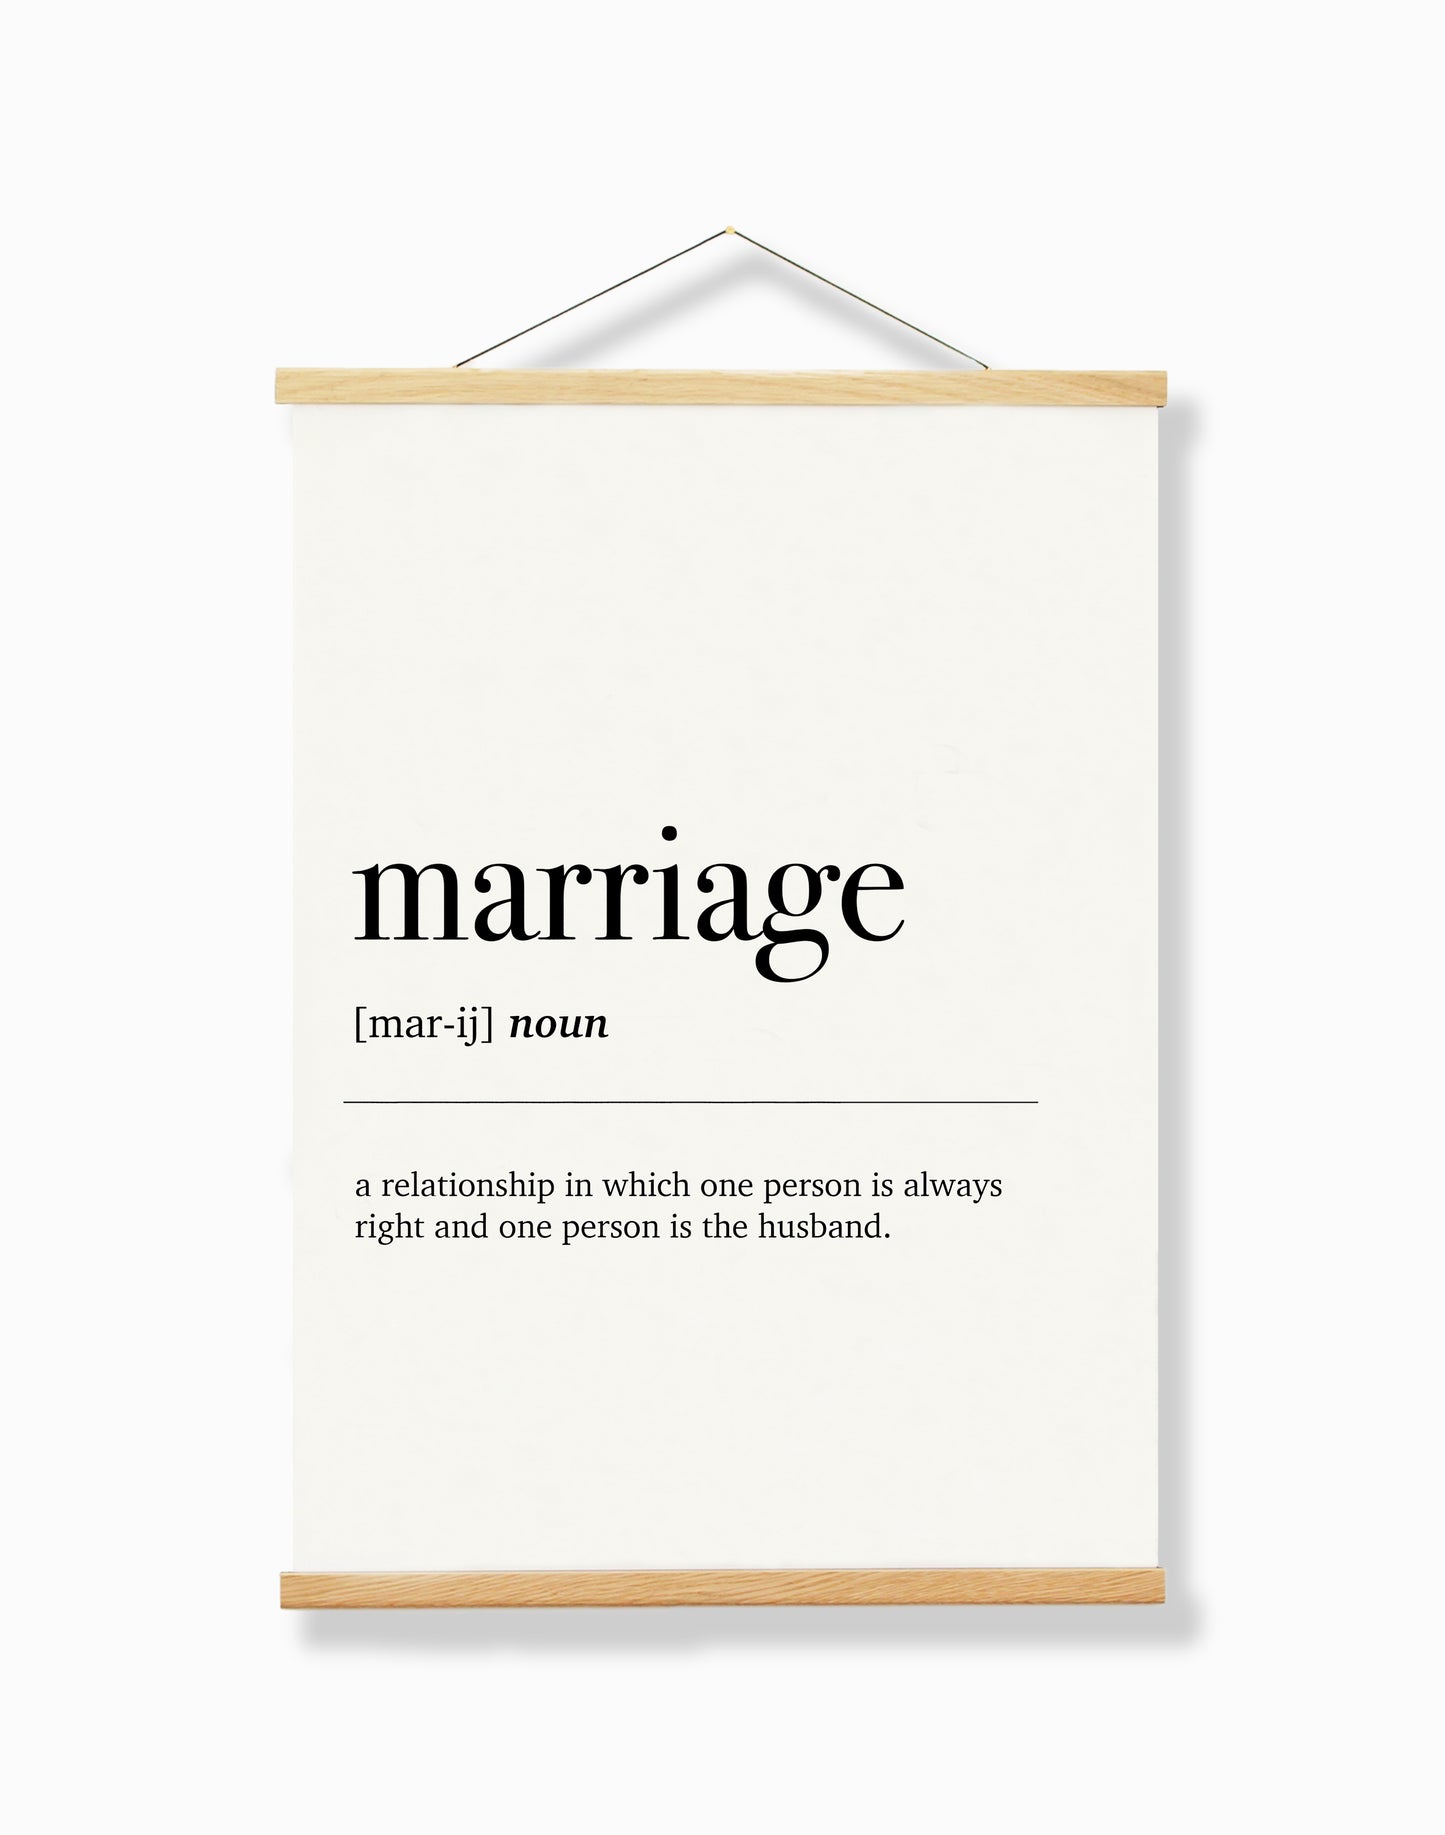 Marriage Dictionary Definition A4 Print